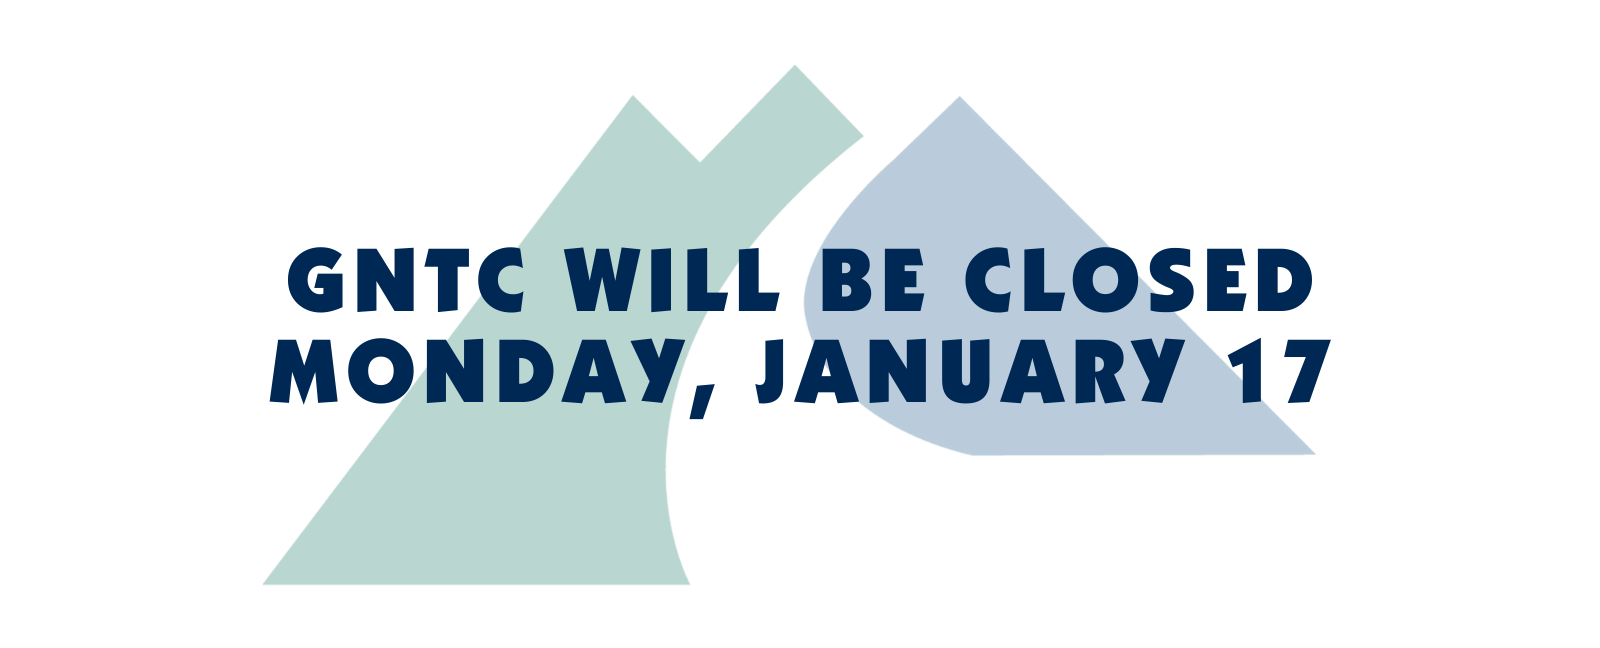 GNTC will be closed Monday, January 17.